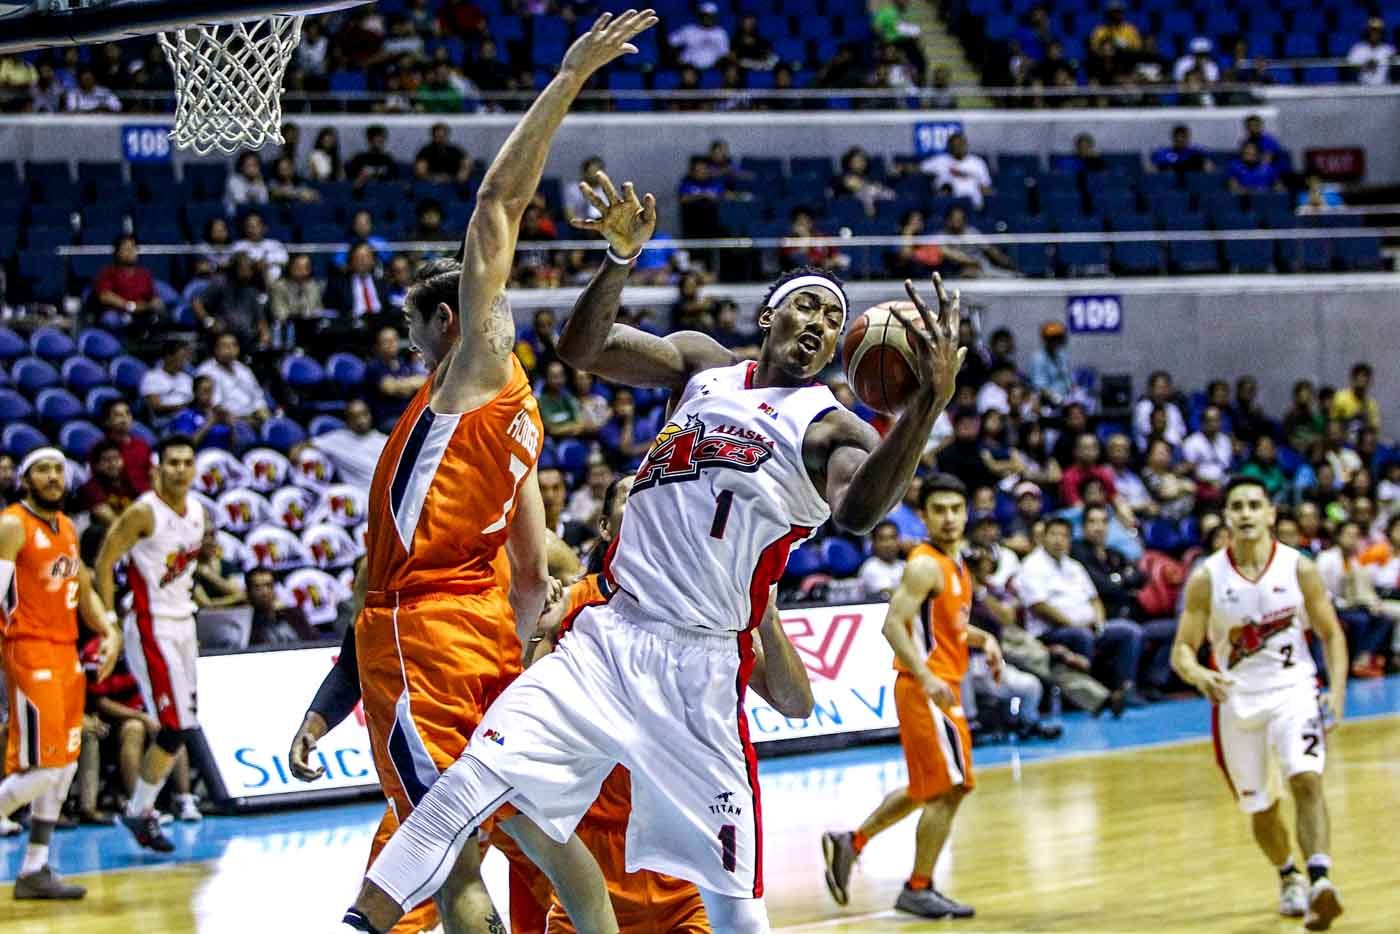 Alaska escapes Meralco, sets up finals duel with Rain or Shine